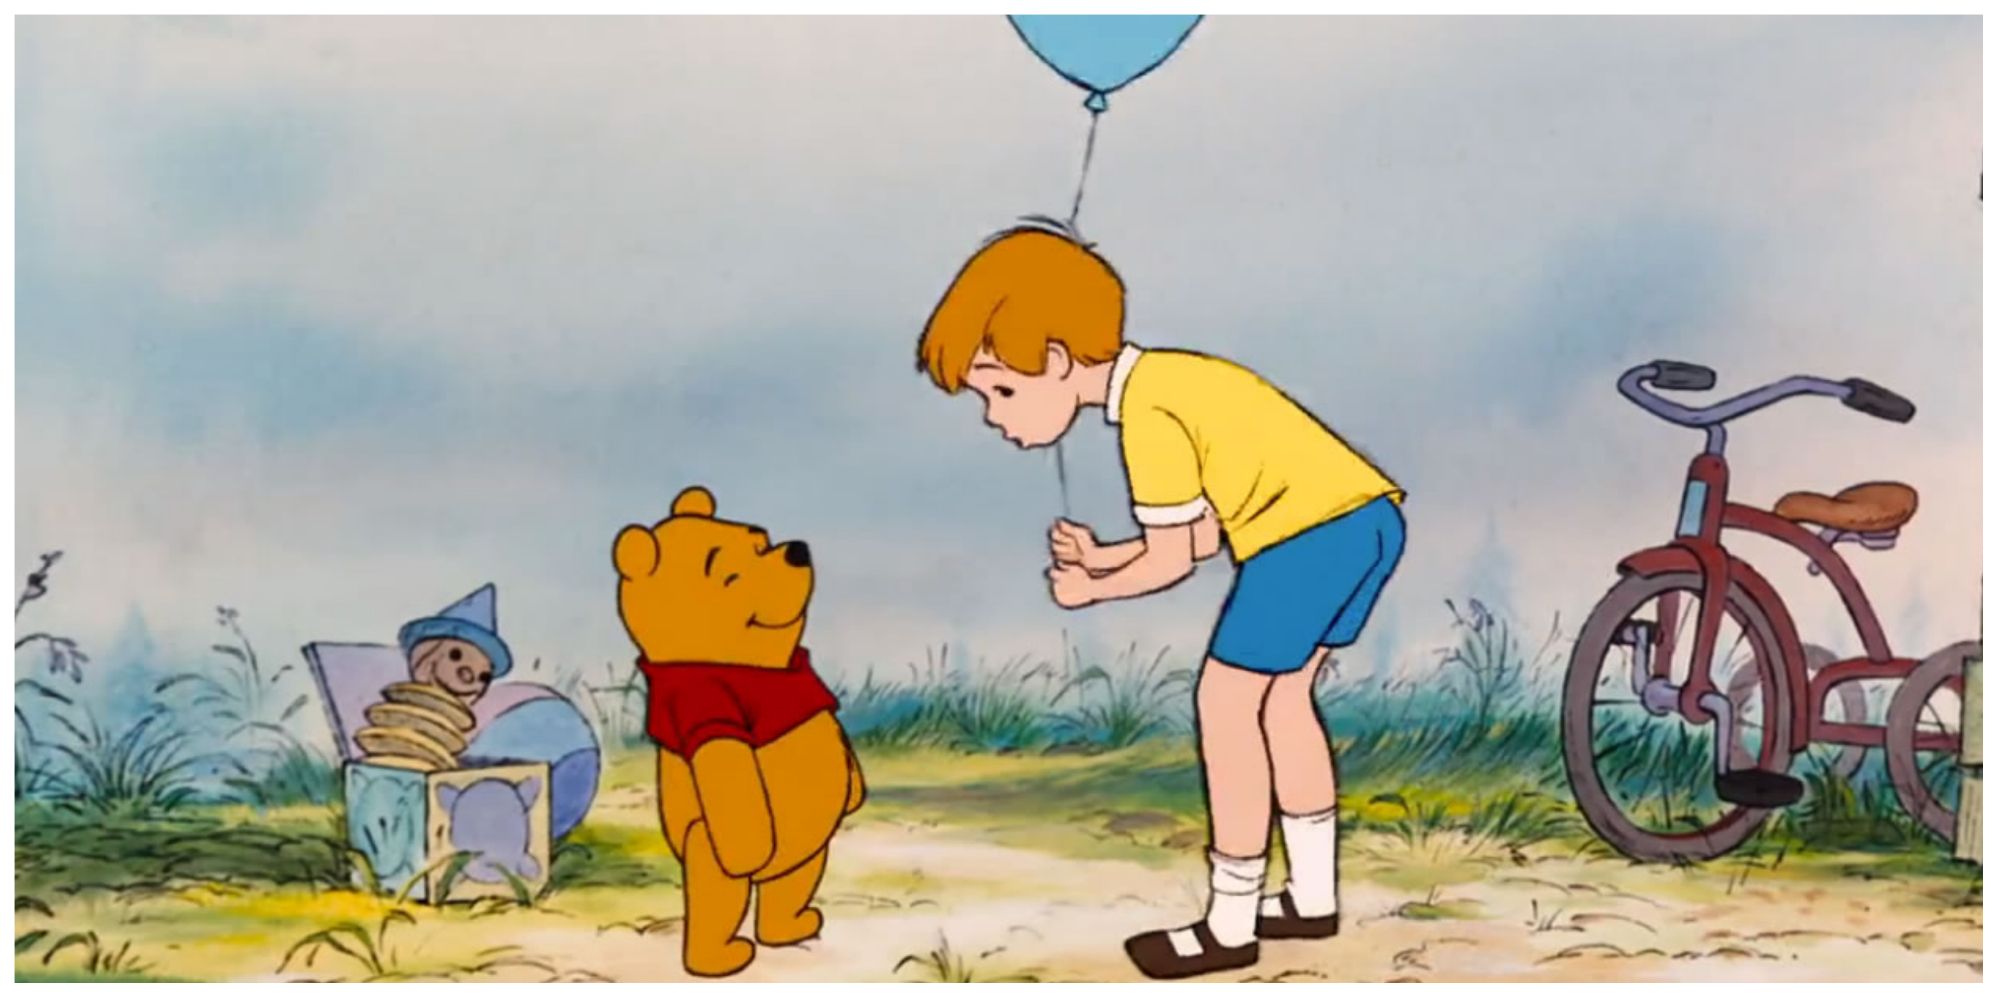 Pooh bear and Christopher Robin in the Many Adventures of Winnie the Pooh